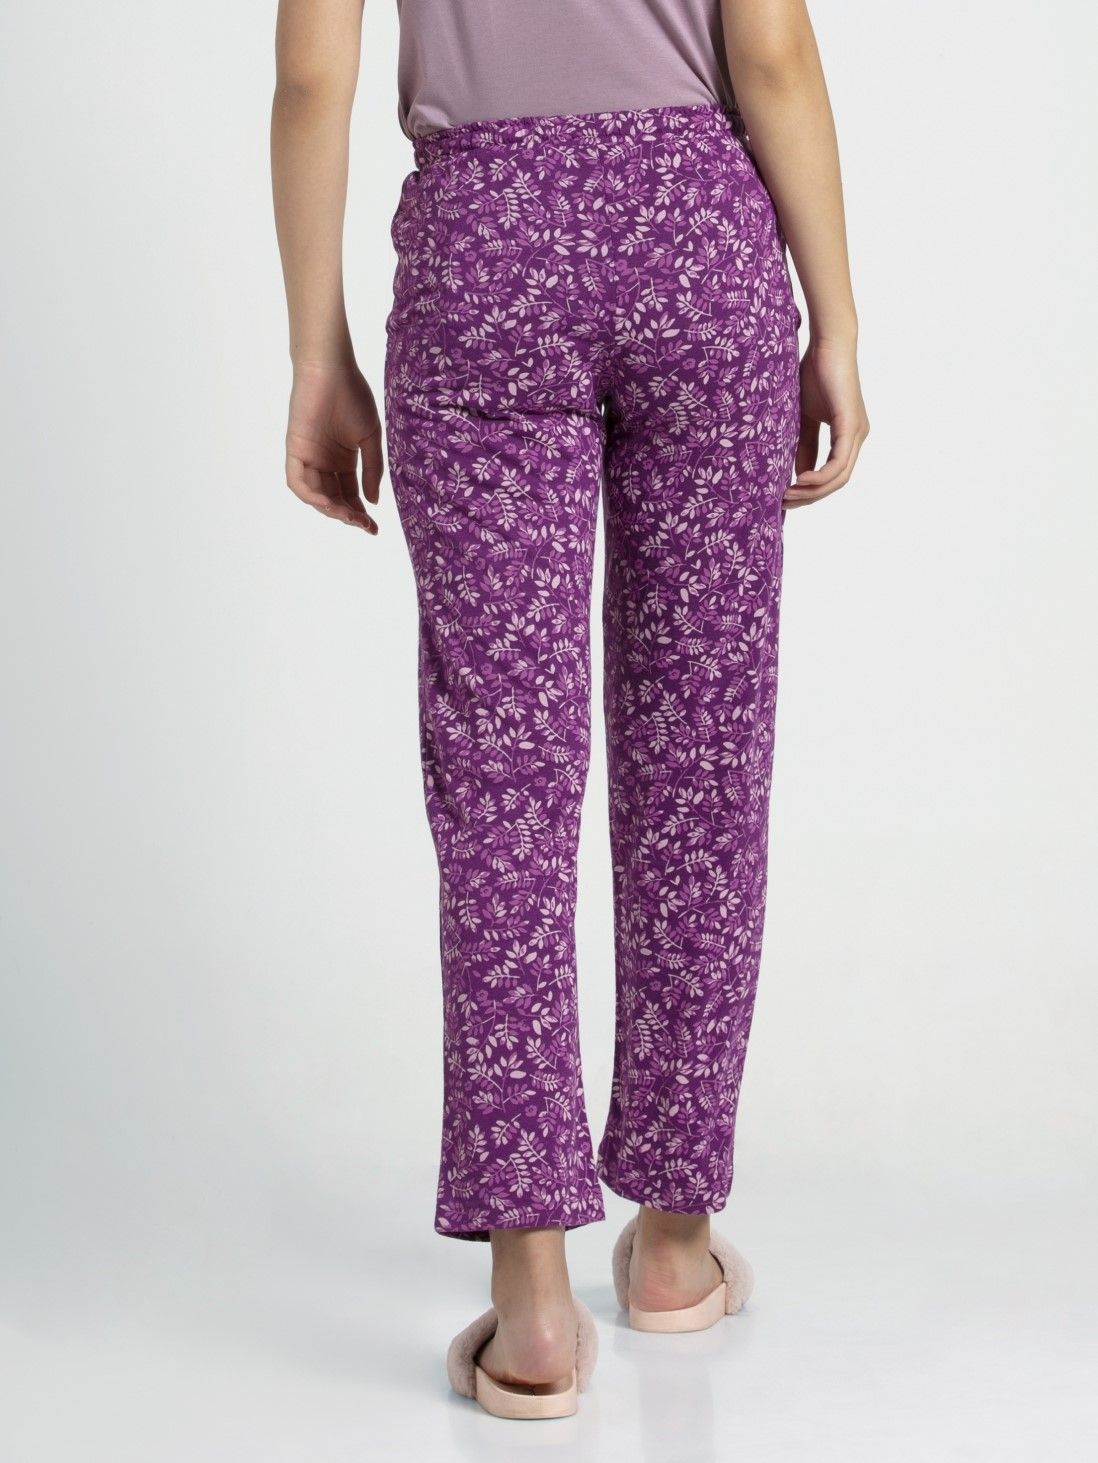 Jockey Lavender Scent Assorted Prints Knit Lounge Pants Style Number ...